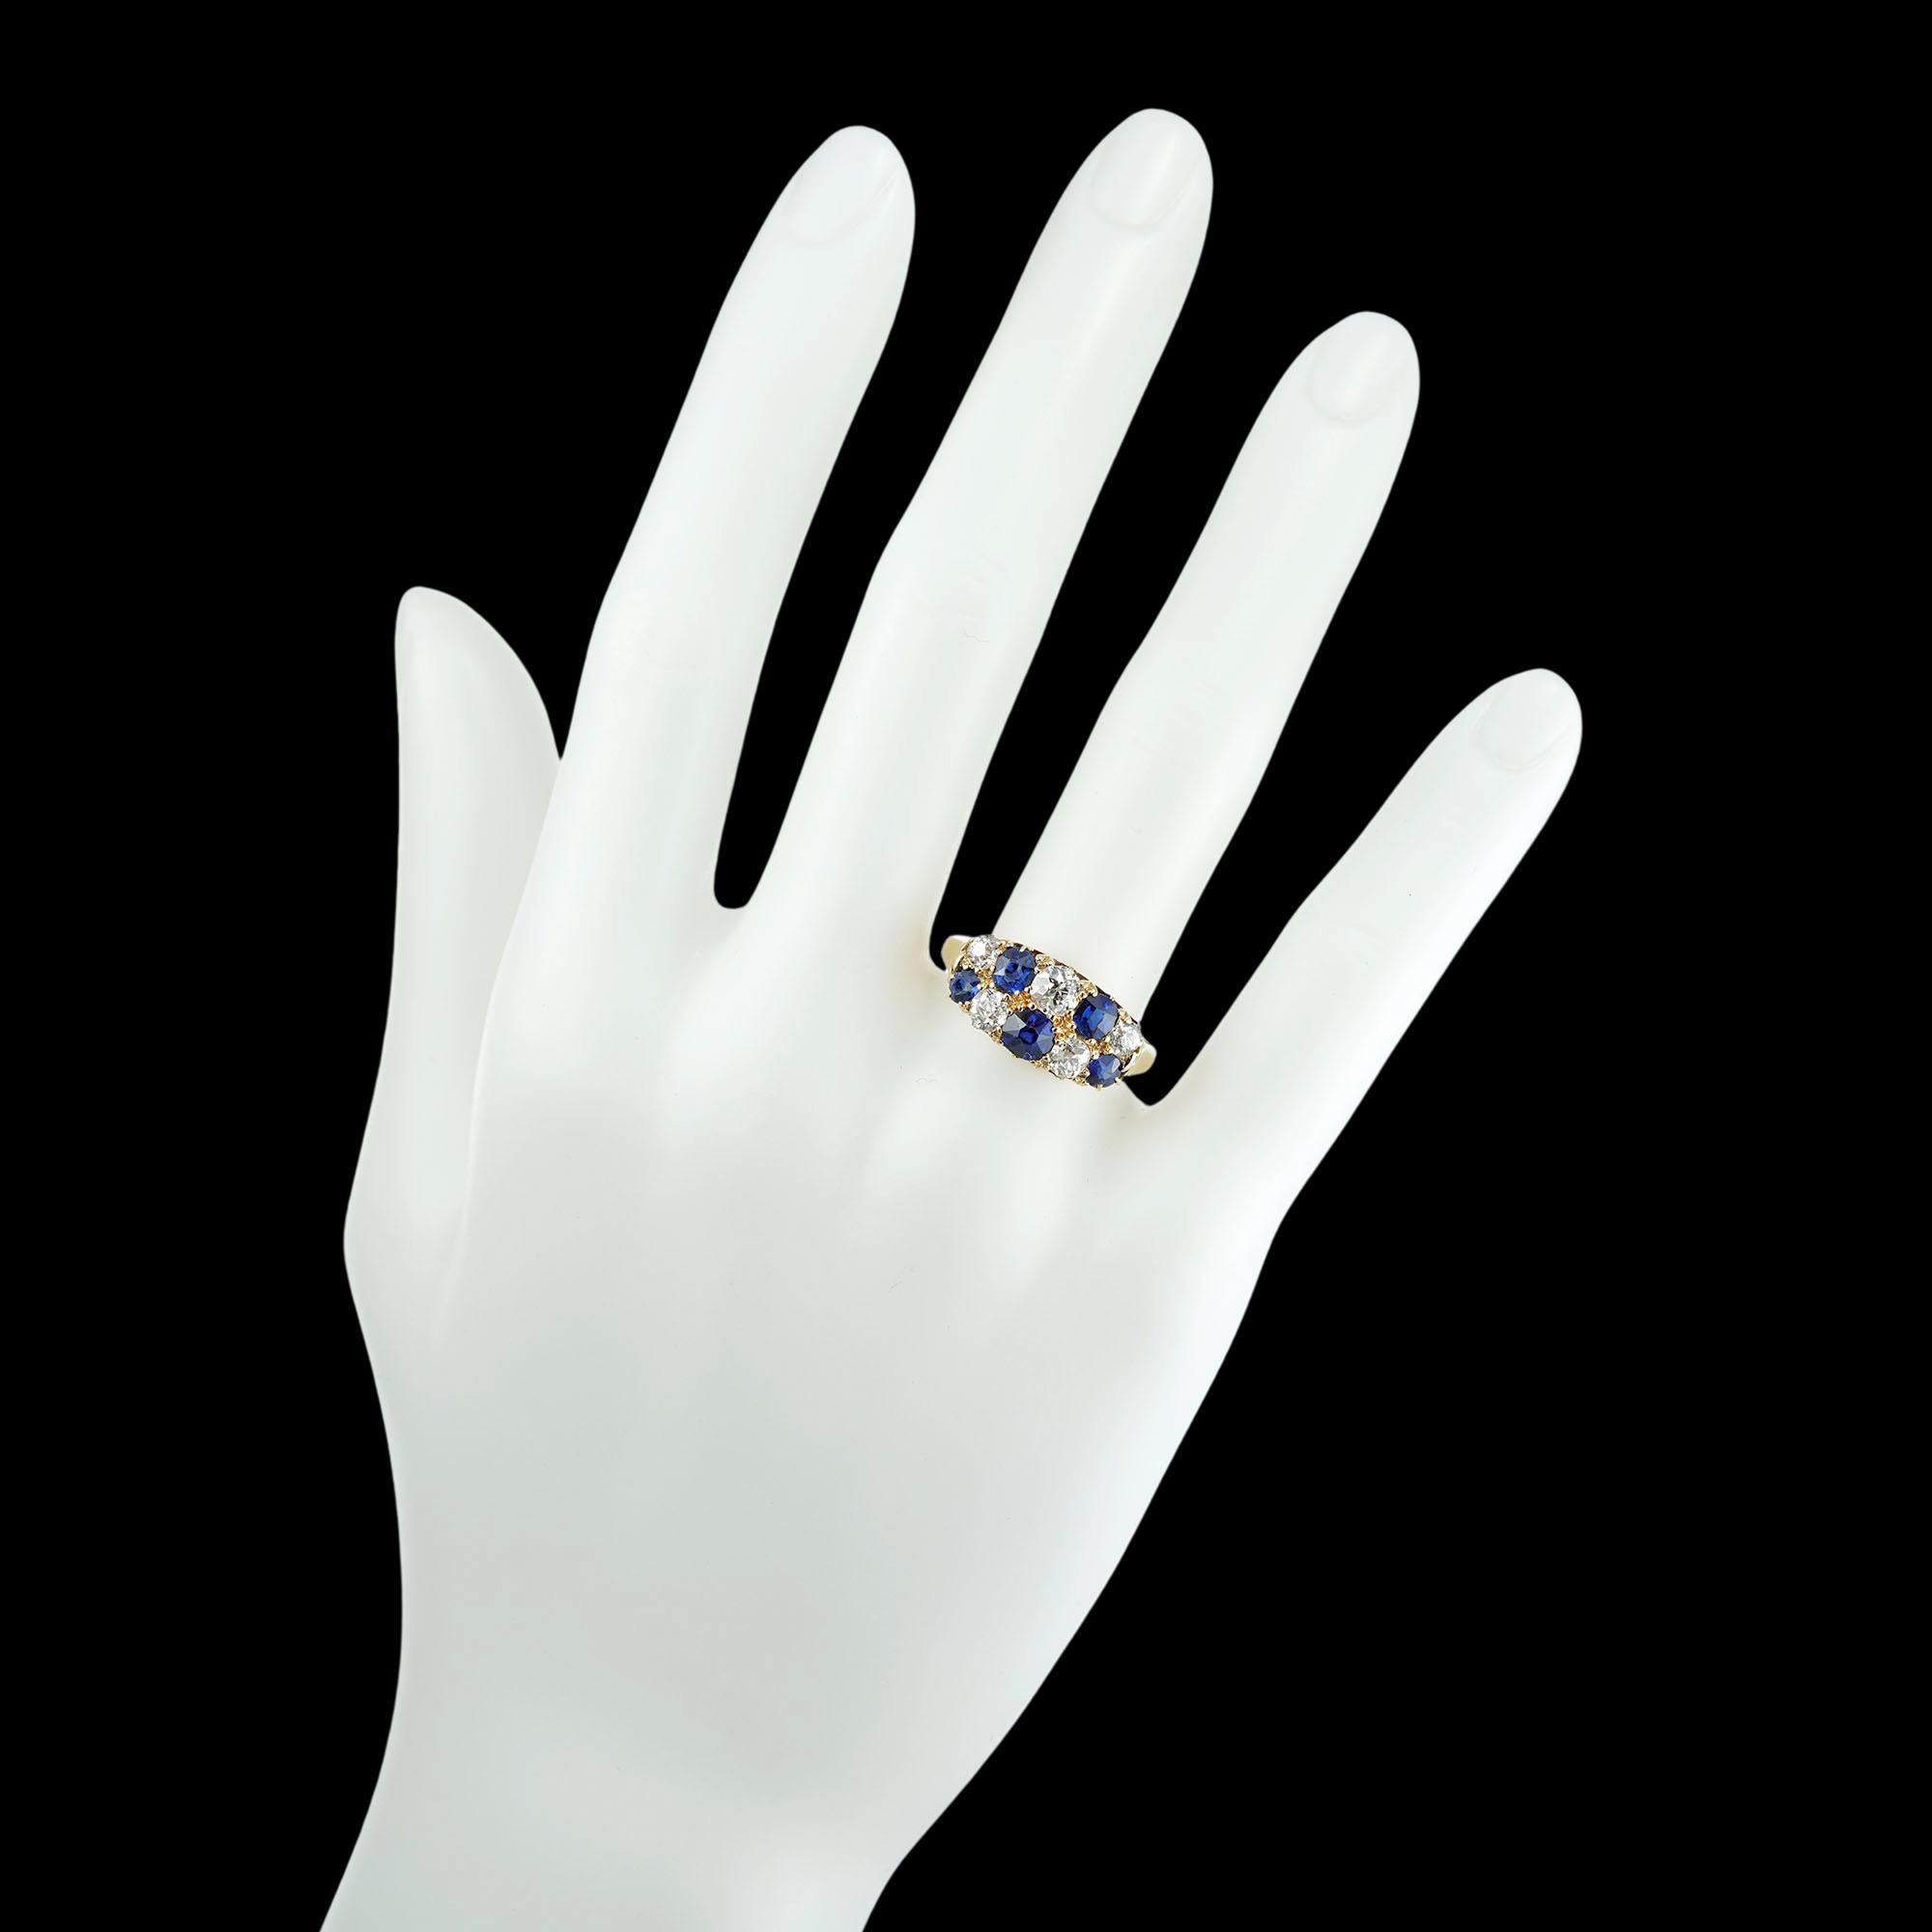 Women's or Men's Late Victorian Double-Row Sapphire and Diamond Ring